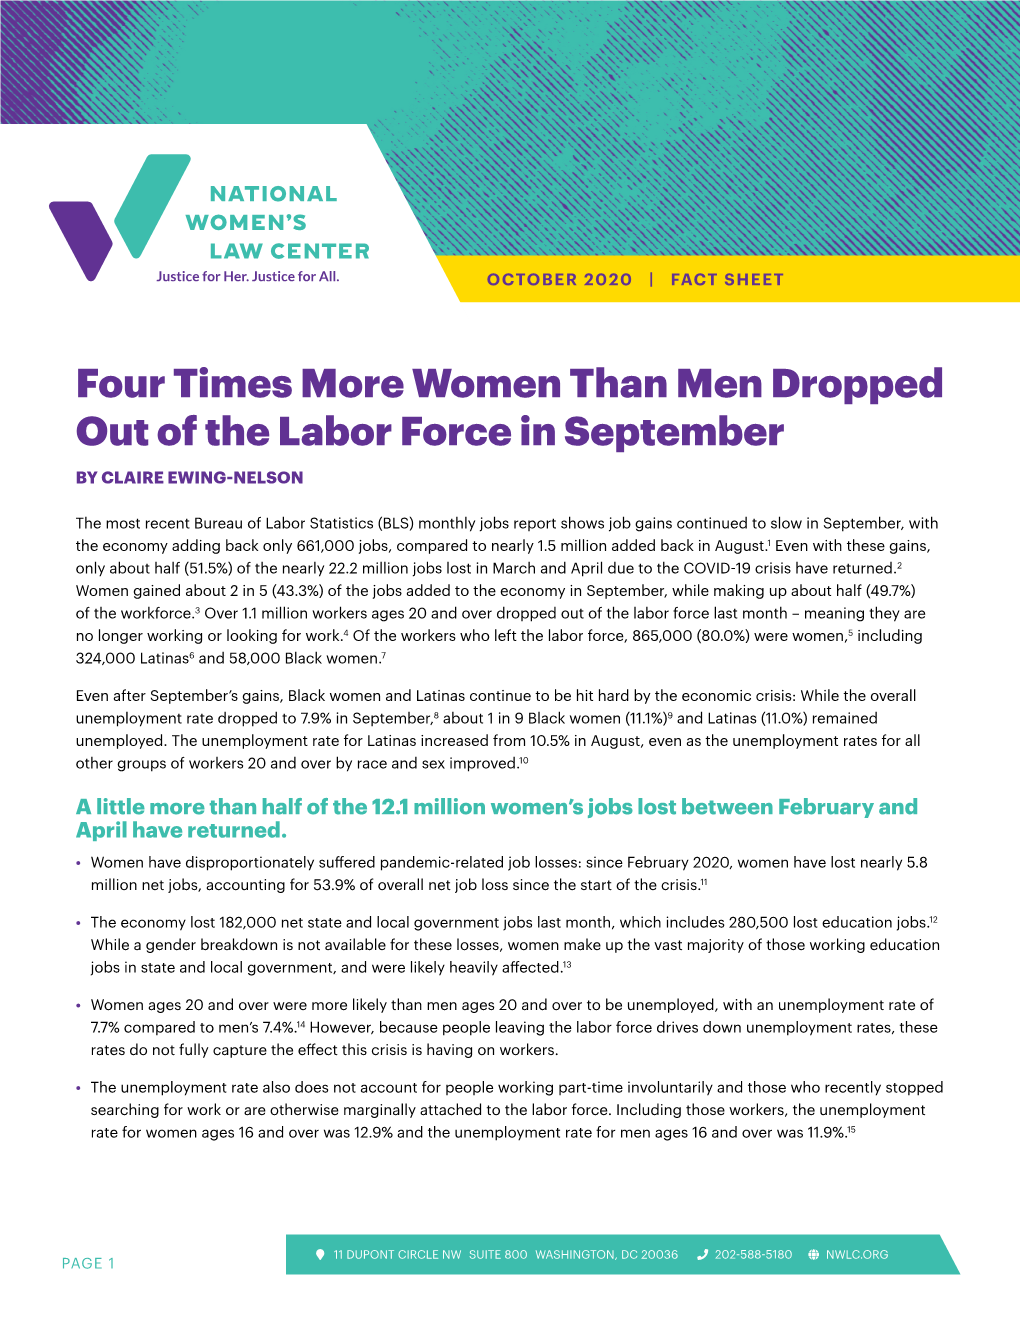 Four Times More Women Than Men Dropped out of the Labor Force in September by CLAIRE EWING-NELSON